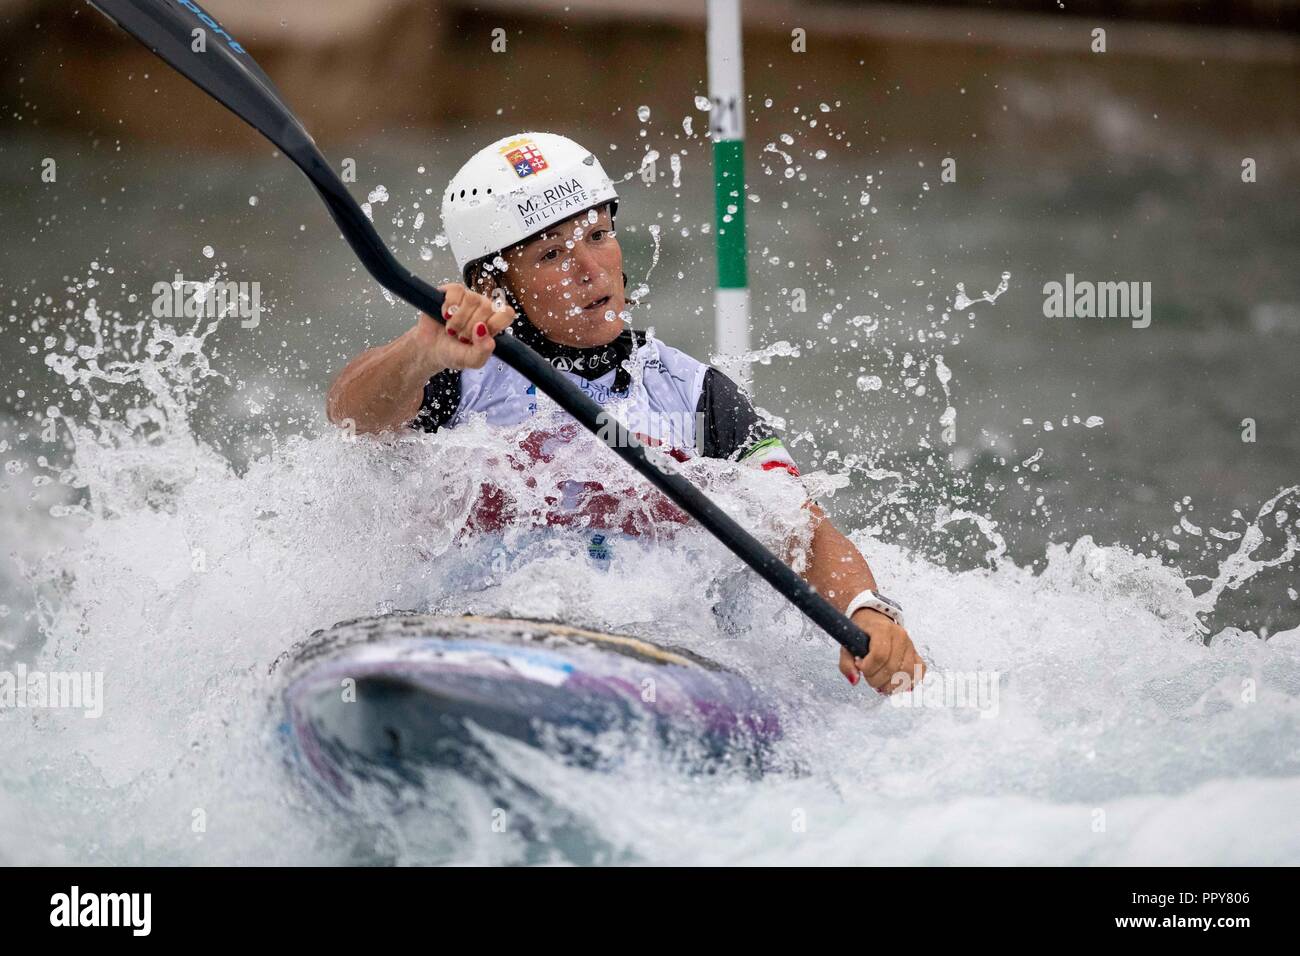 Rio De Janeiro, Brazil. 28th Sep, 2018. Stefanie Horn of Italy competes during the women's Kayak (K1) semifinal during the 2018 ICF Canoe Slalom World Championships in Rio de Janeiro, Brazil, on Sept. 28, 2018. Stefanie Horn advanced to the final with 107.85 seconds. Credit: Li Ming/Xinhua/Alamy Live News Stock Photo